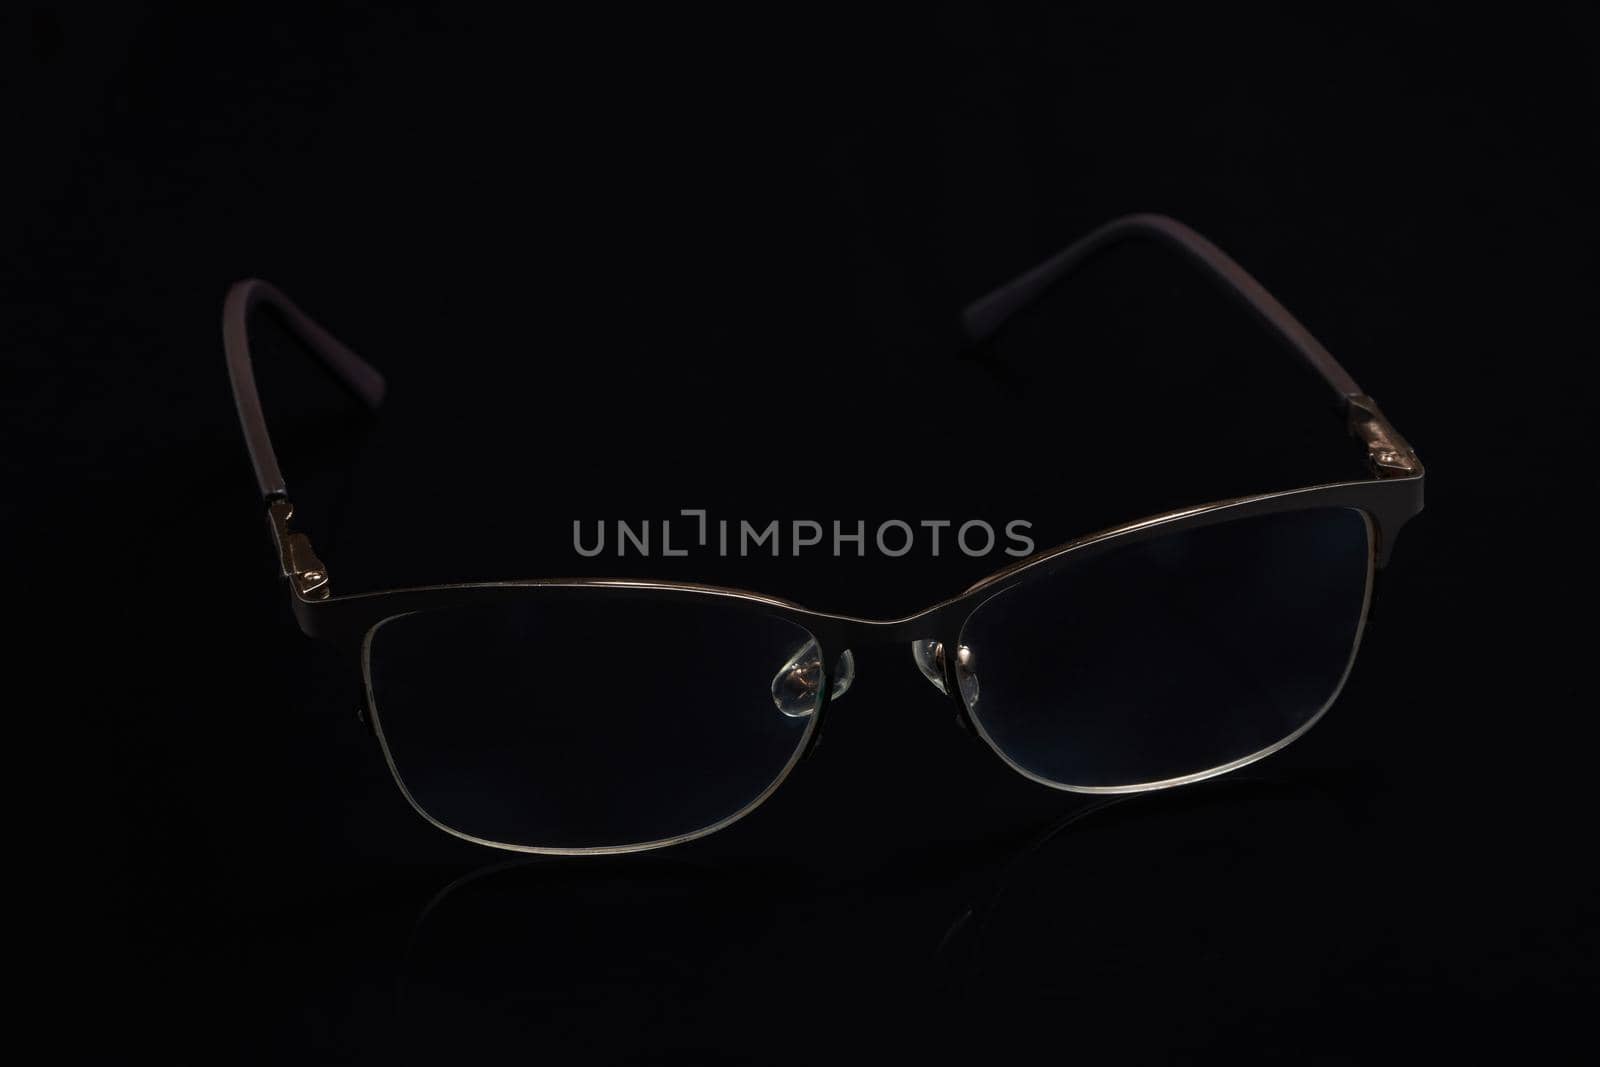 Glasses in fashionable frames on a black background. Close up